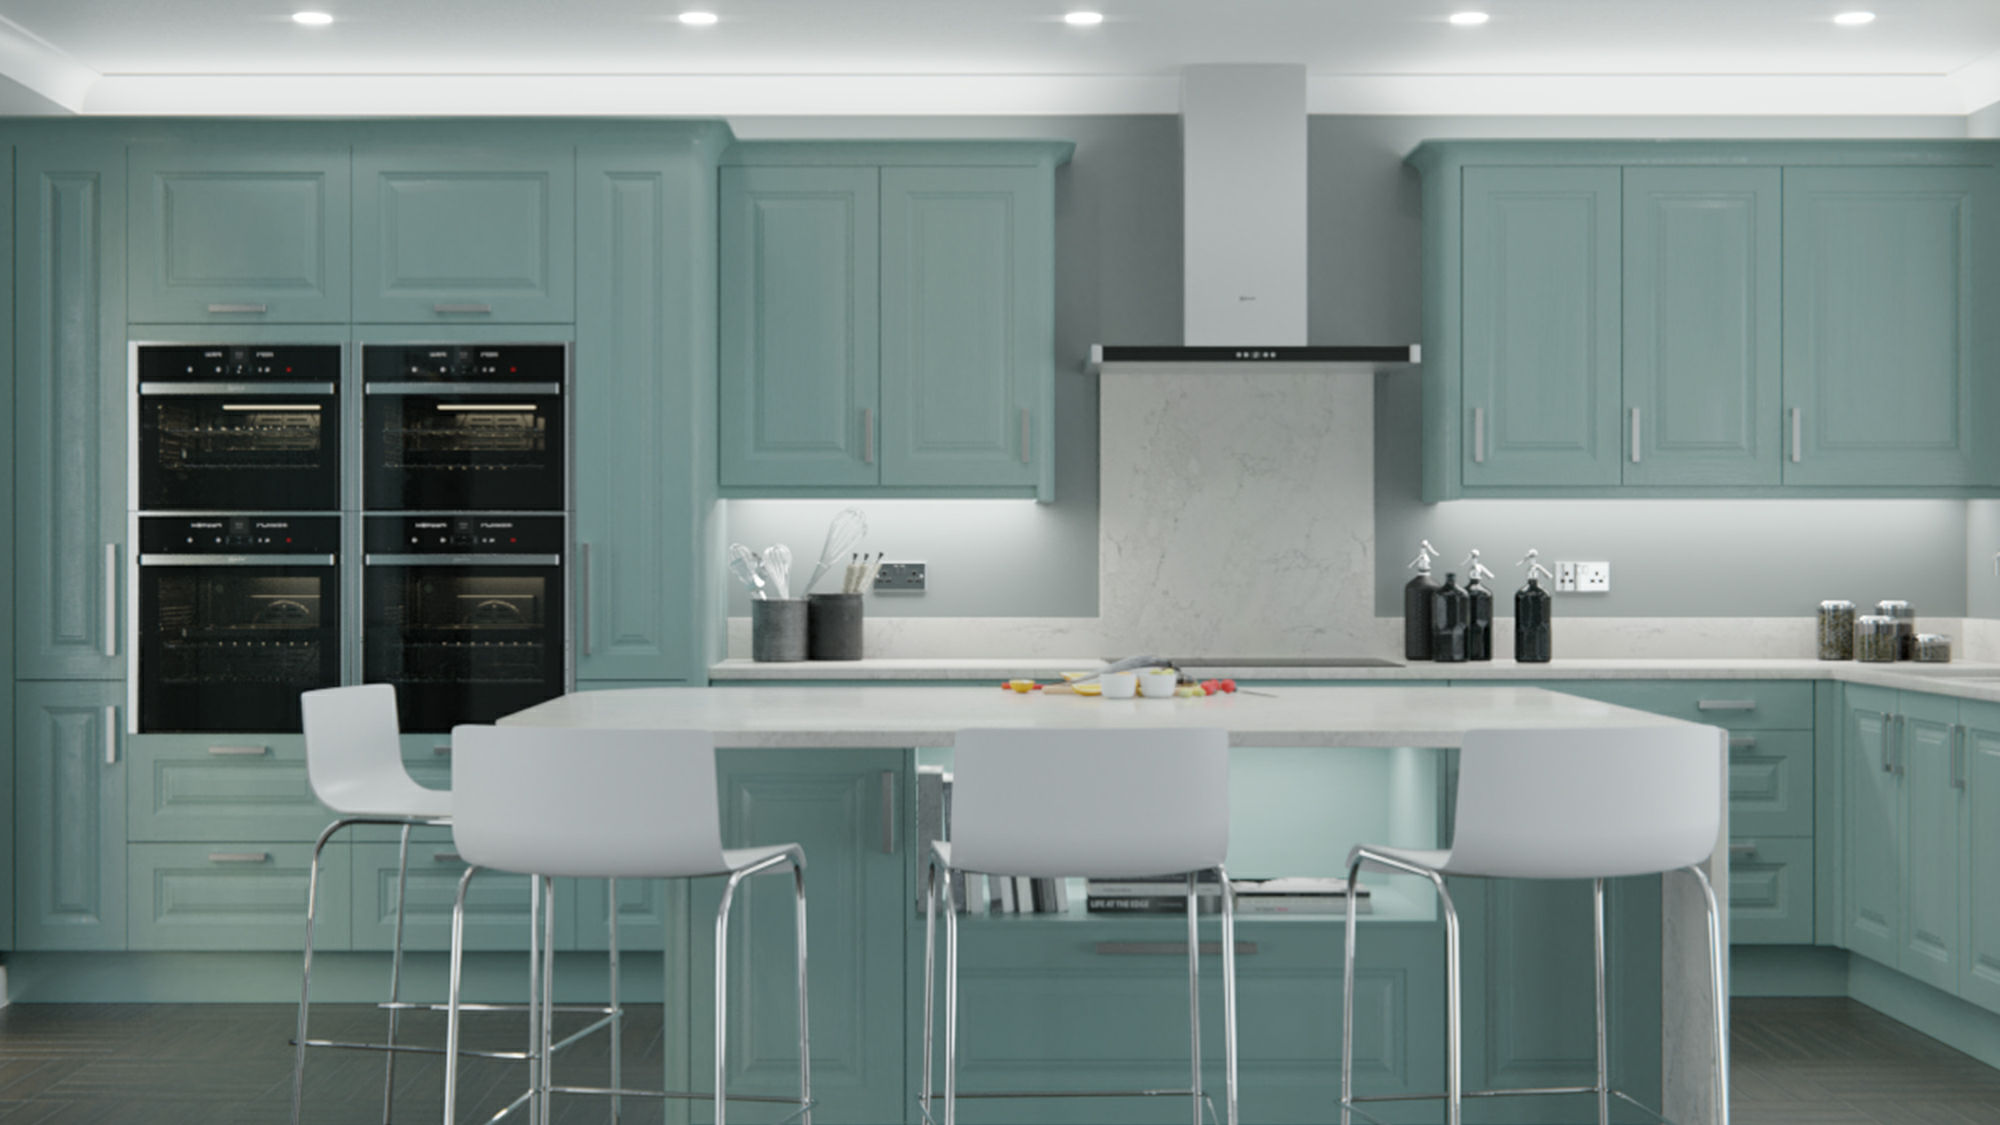 Jefferson solid wood Light Teal kitchens marrying robust design with the soft tranquility of light teal tones